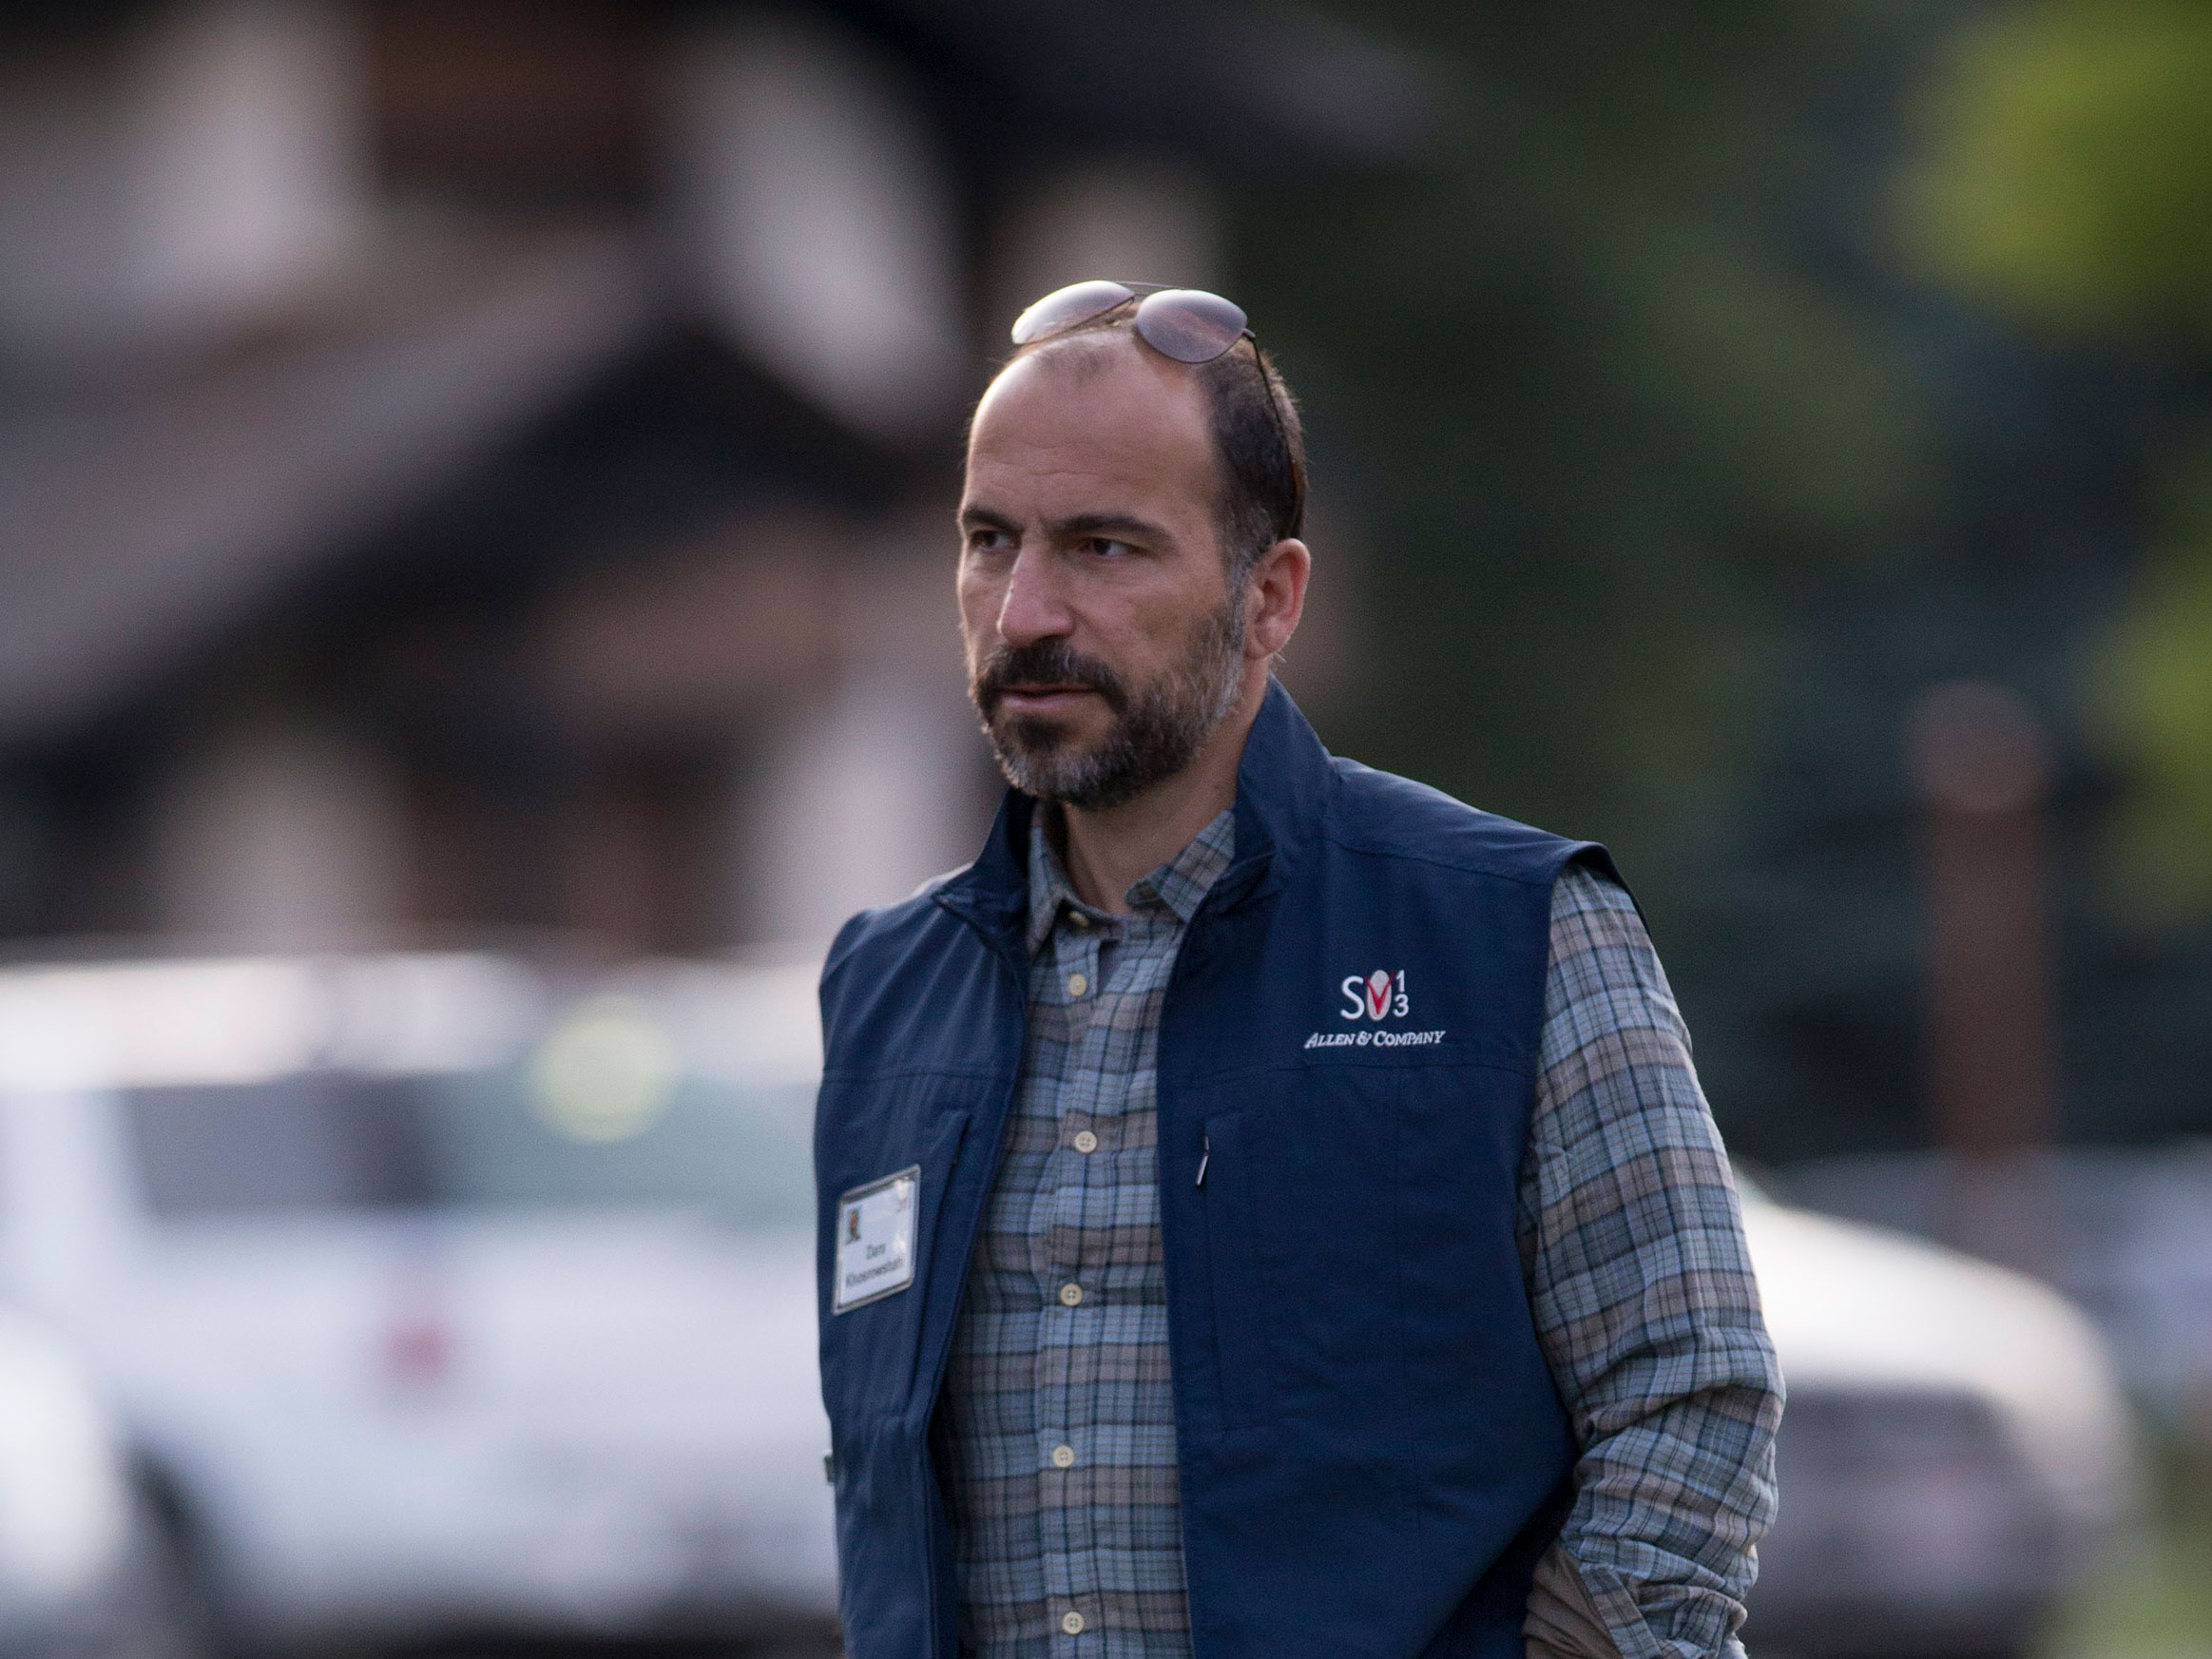 Uber finally confirms that Khosrowshahi will be its new CEO